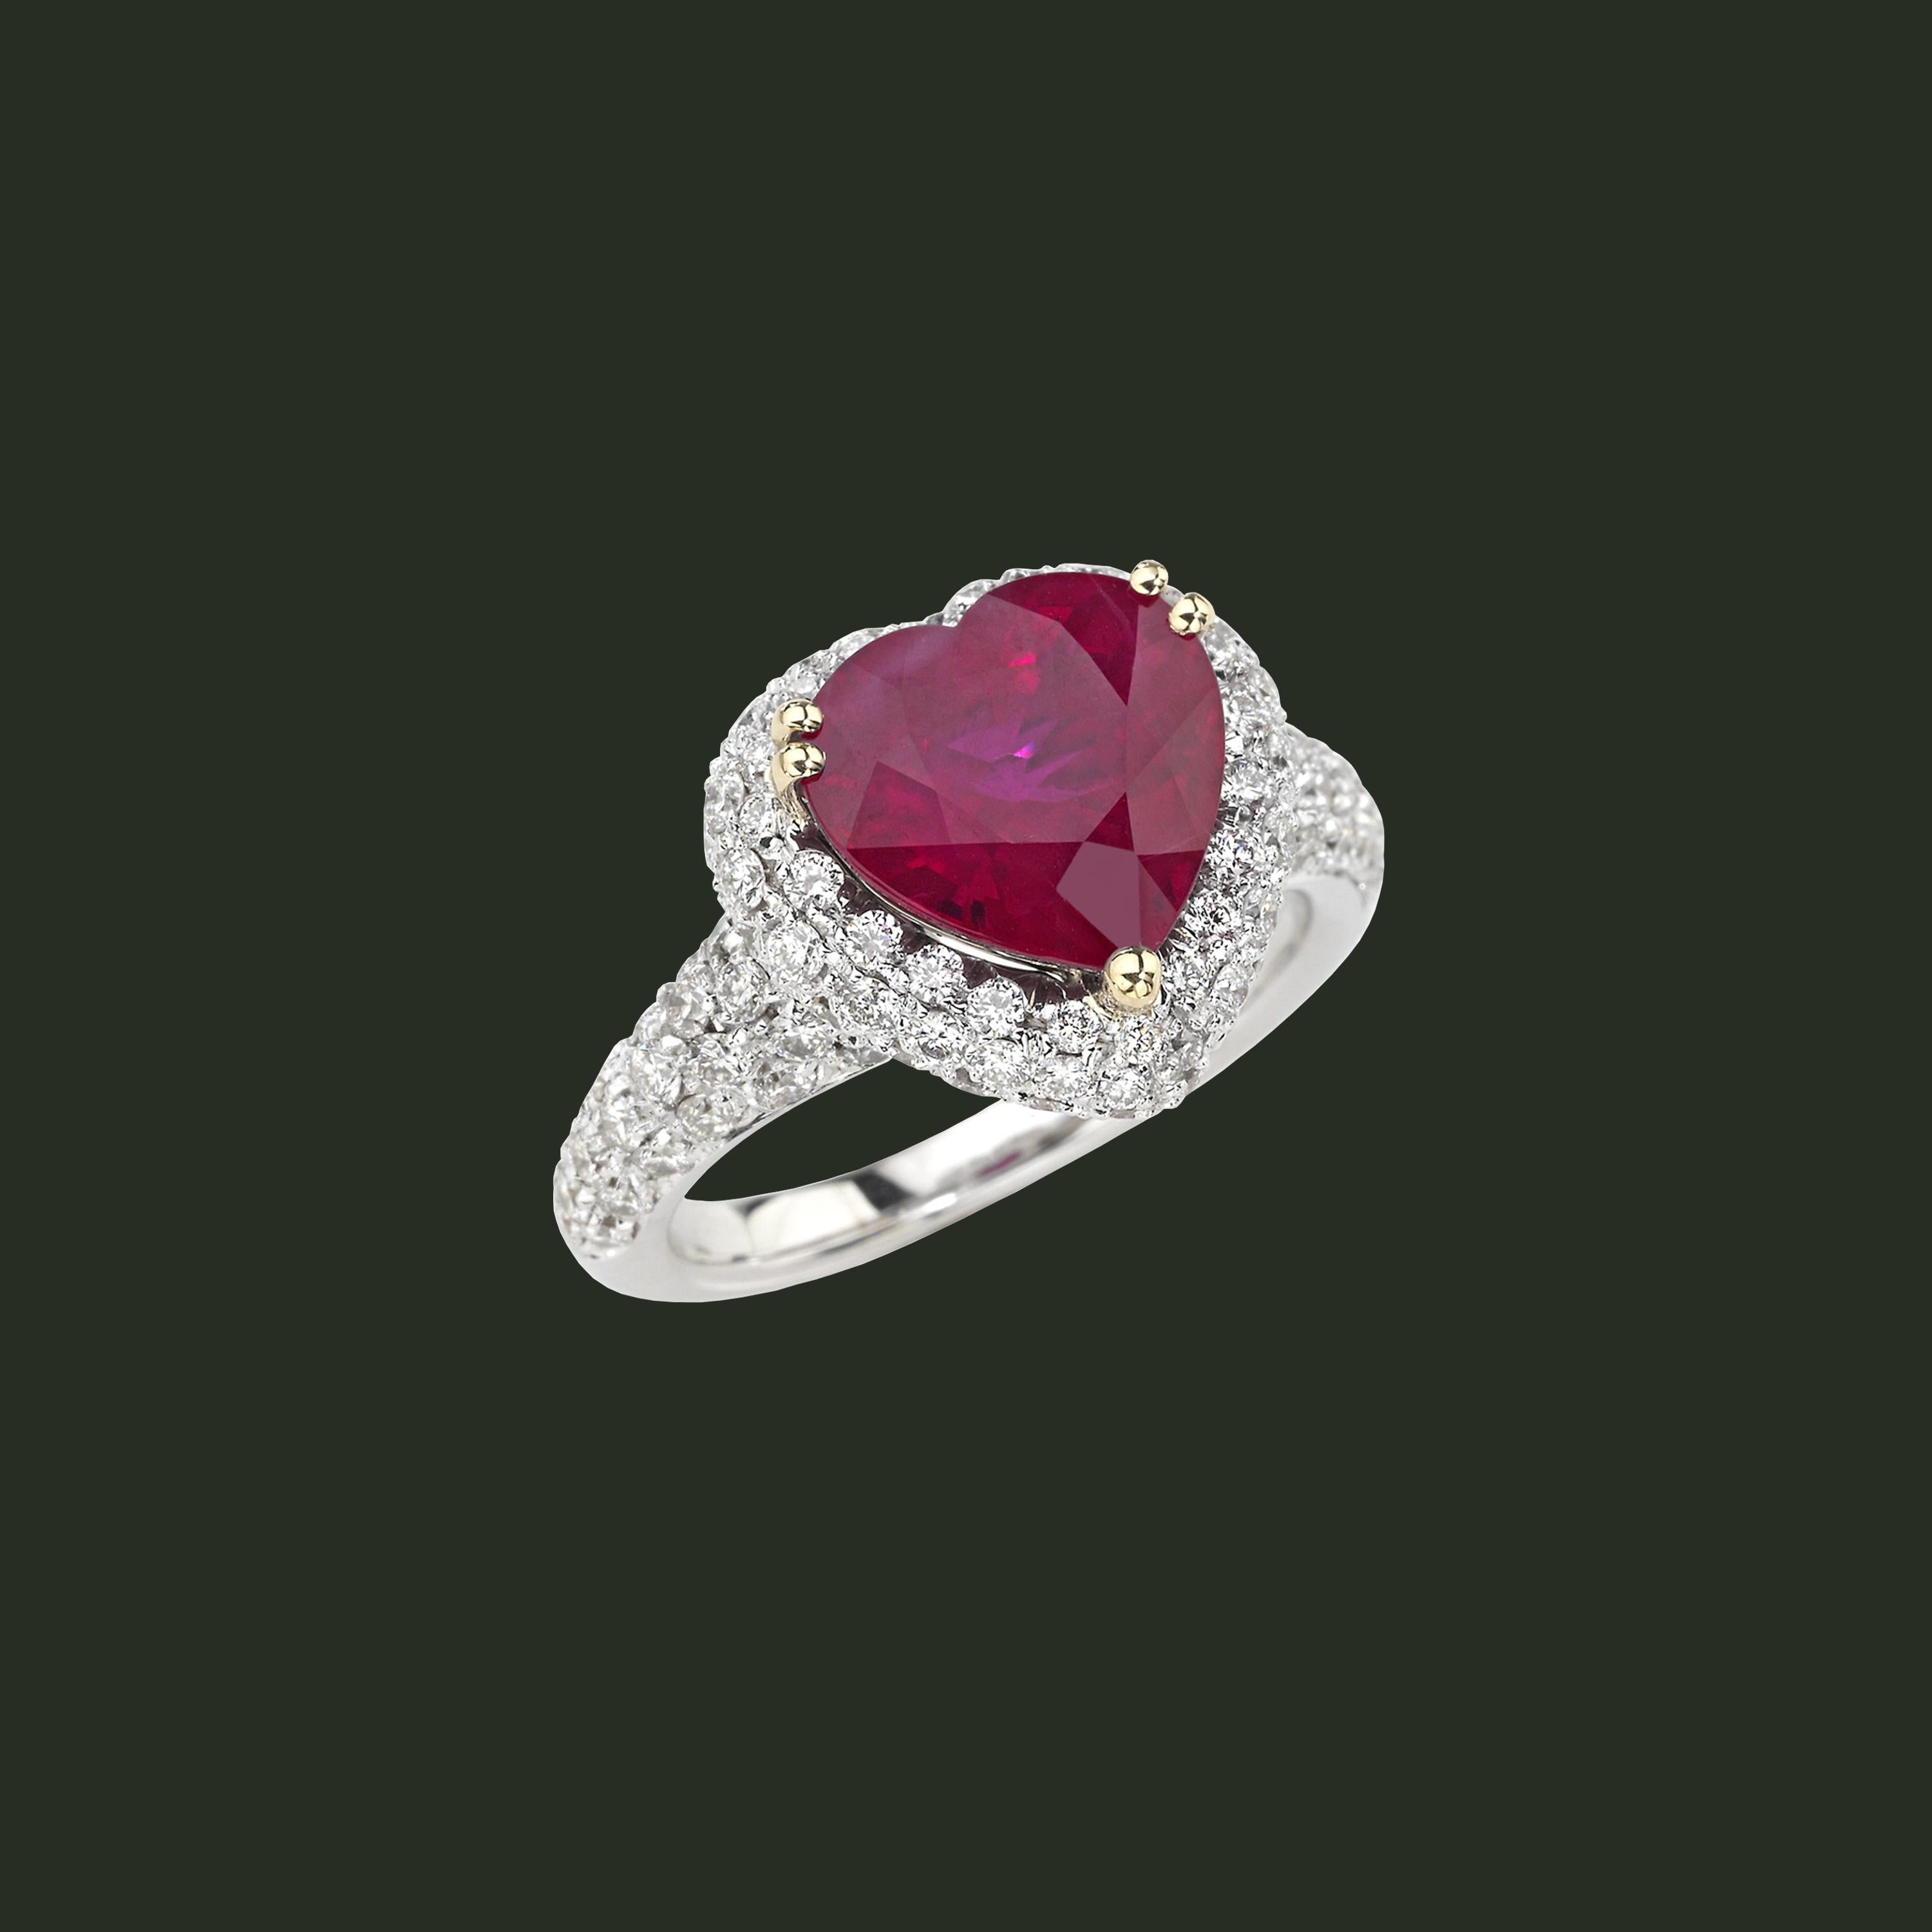 Pear Cut Picchiotti GRS Report 4.29 Carat Heart-shape Burma Ruby and round Diamond Ring For Sale